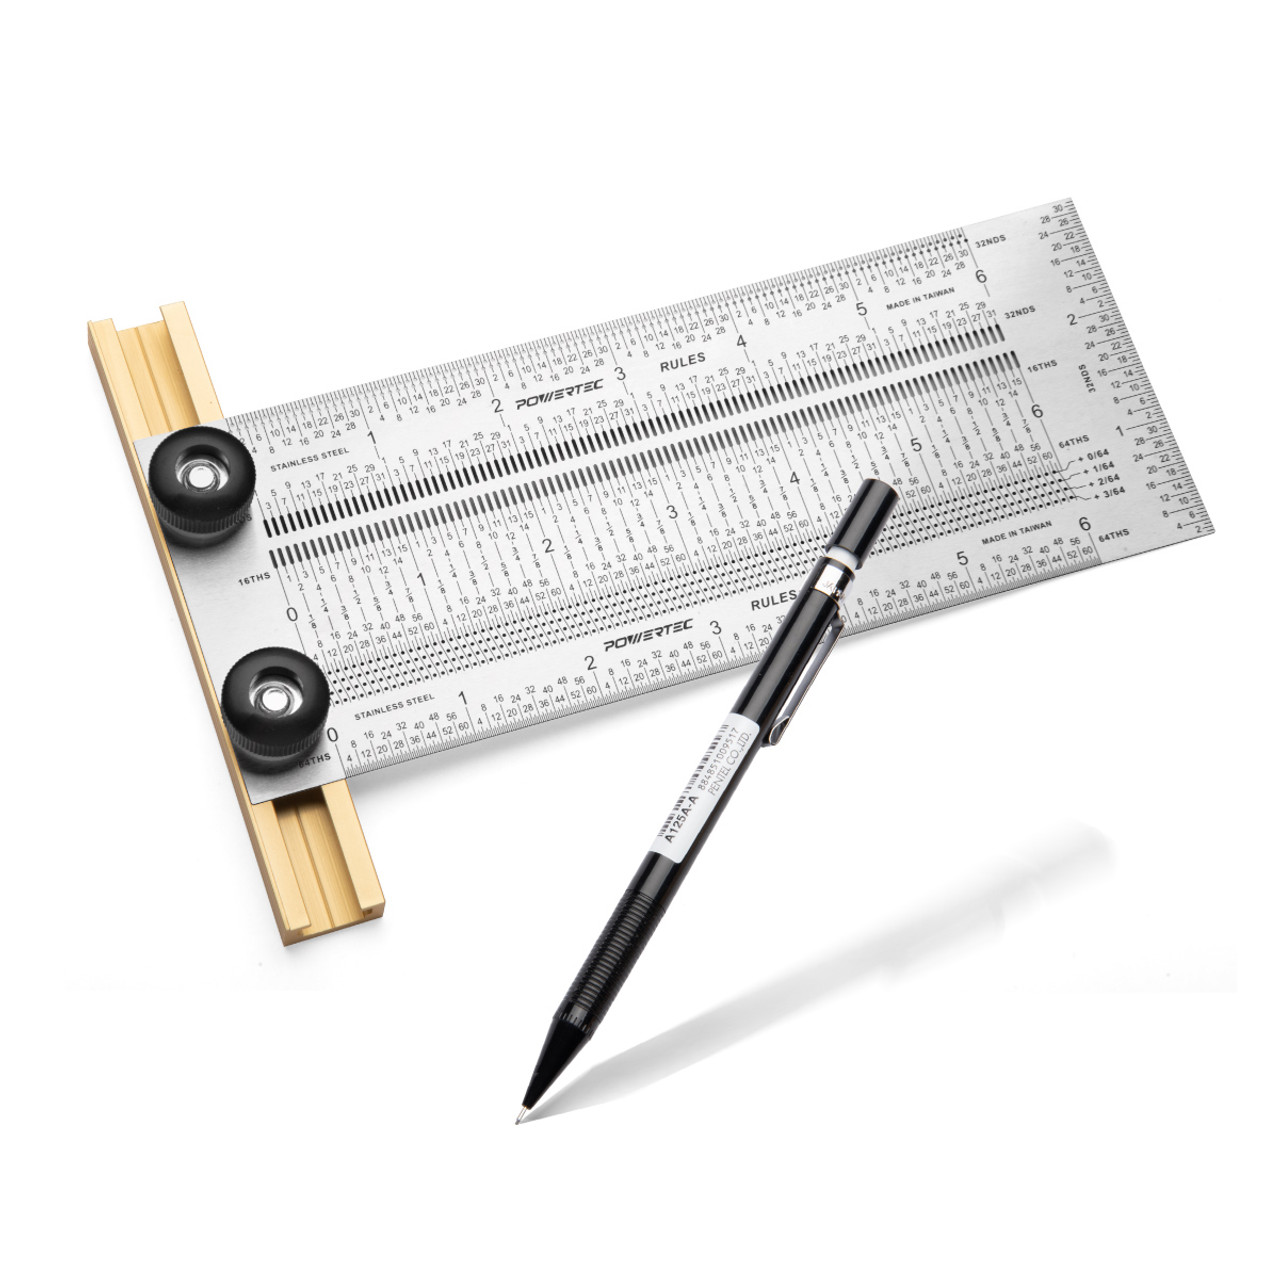 Holex Engineer's Precision Stainless Steel Ruler